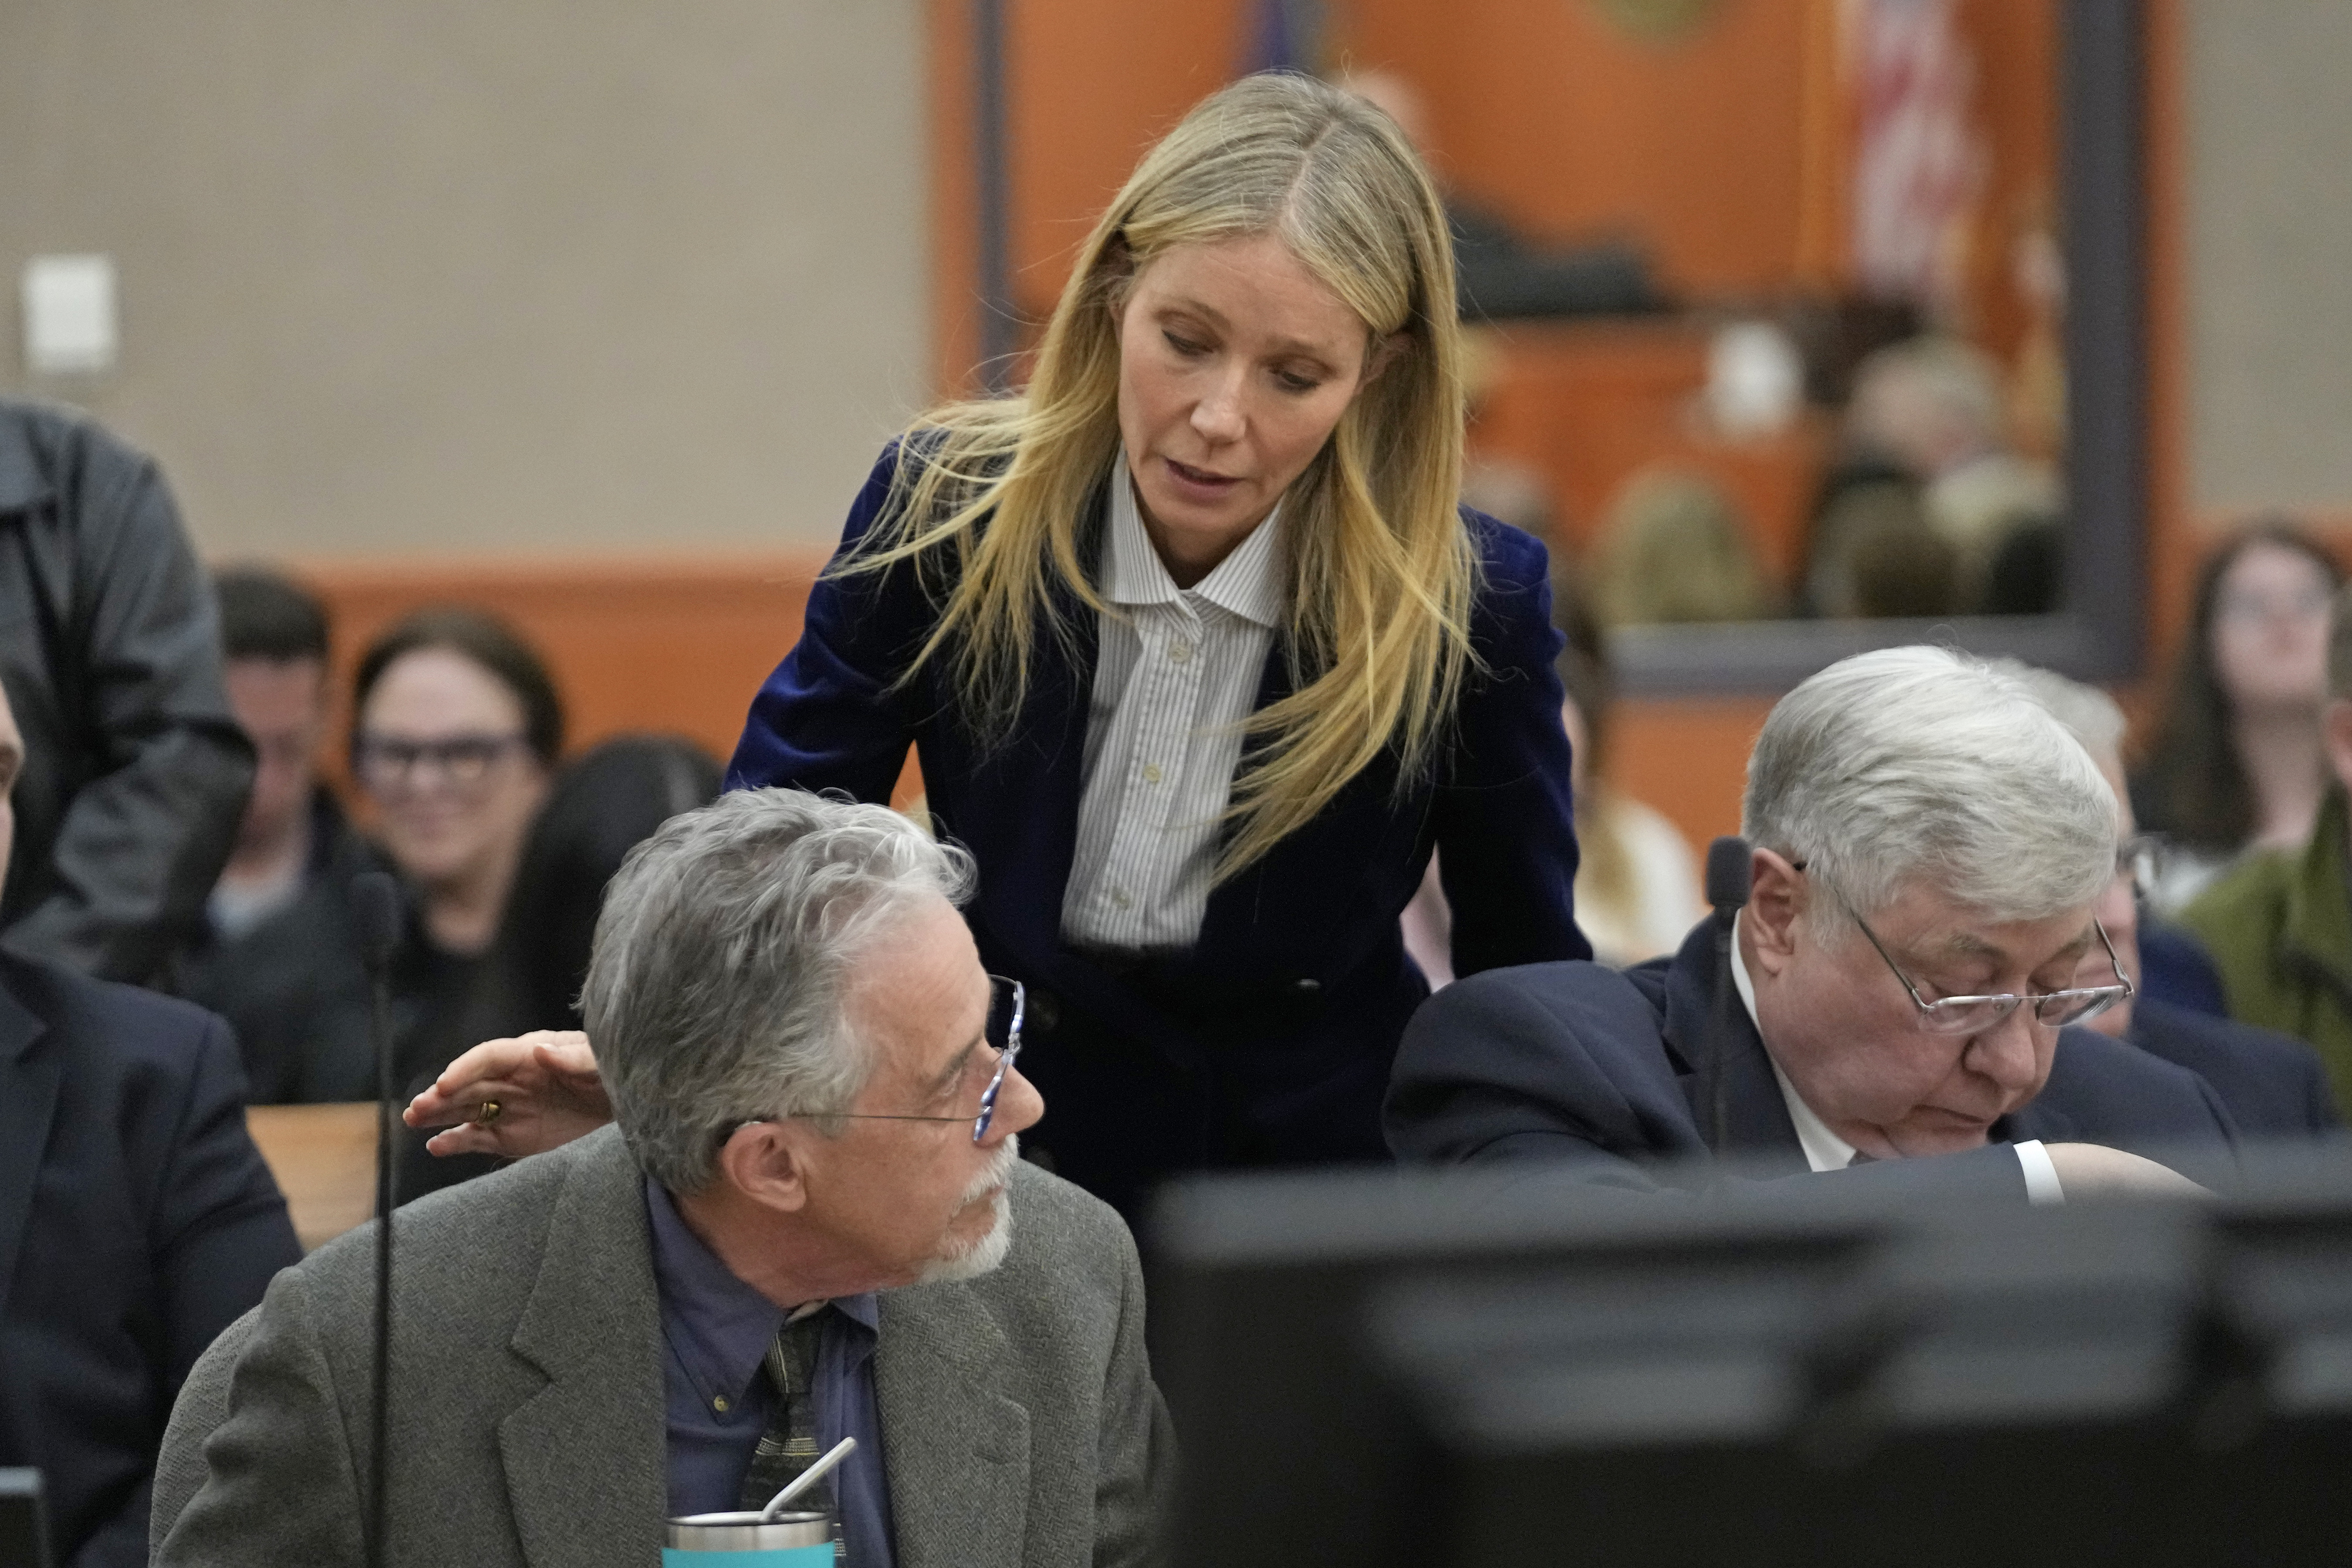 FILE- Gwyneth Paltrow speaks with retired optometrist Terry Sanderson, left, as she leaves court after the verdict was read in her ski accident trial on March 30, 2023, in Park City, Utah.  In a decision released Saturday, April 29, 2023, the court upheld a jury verdict that found Paltrow was not at fault in a 2016 collision with Terry Sanderson and said Sanderson would not be required to pay Paltrow's attorneys' fees. Paltrow and had agreed not to appeal the verdict.  (AP Photo/Rick Bowmer, Pool, File)